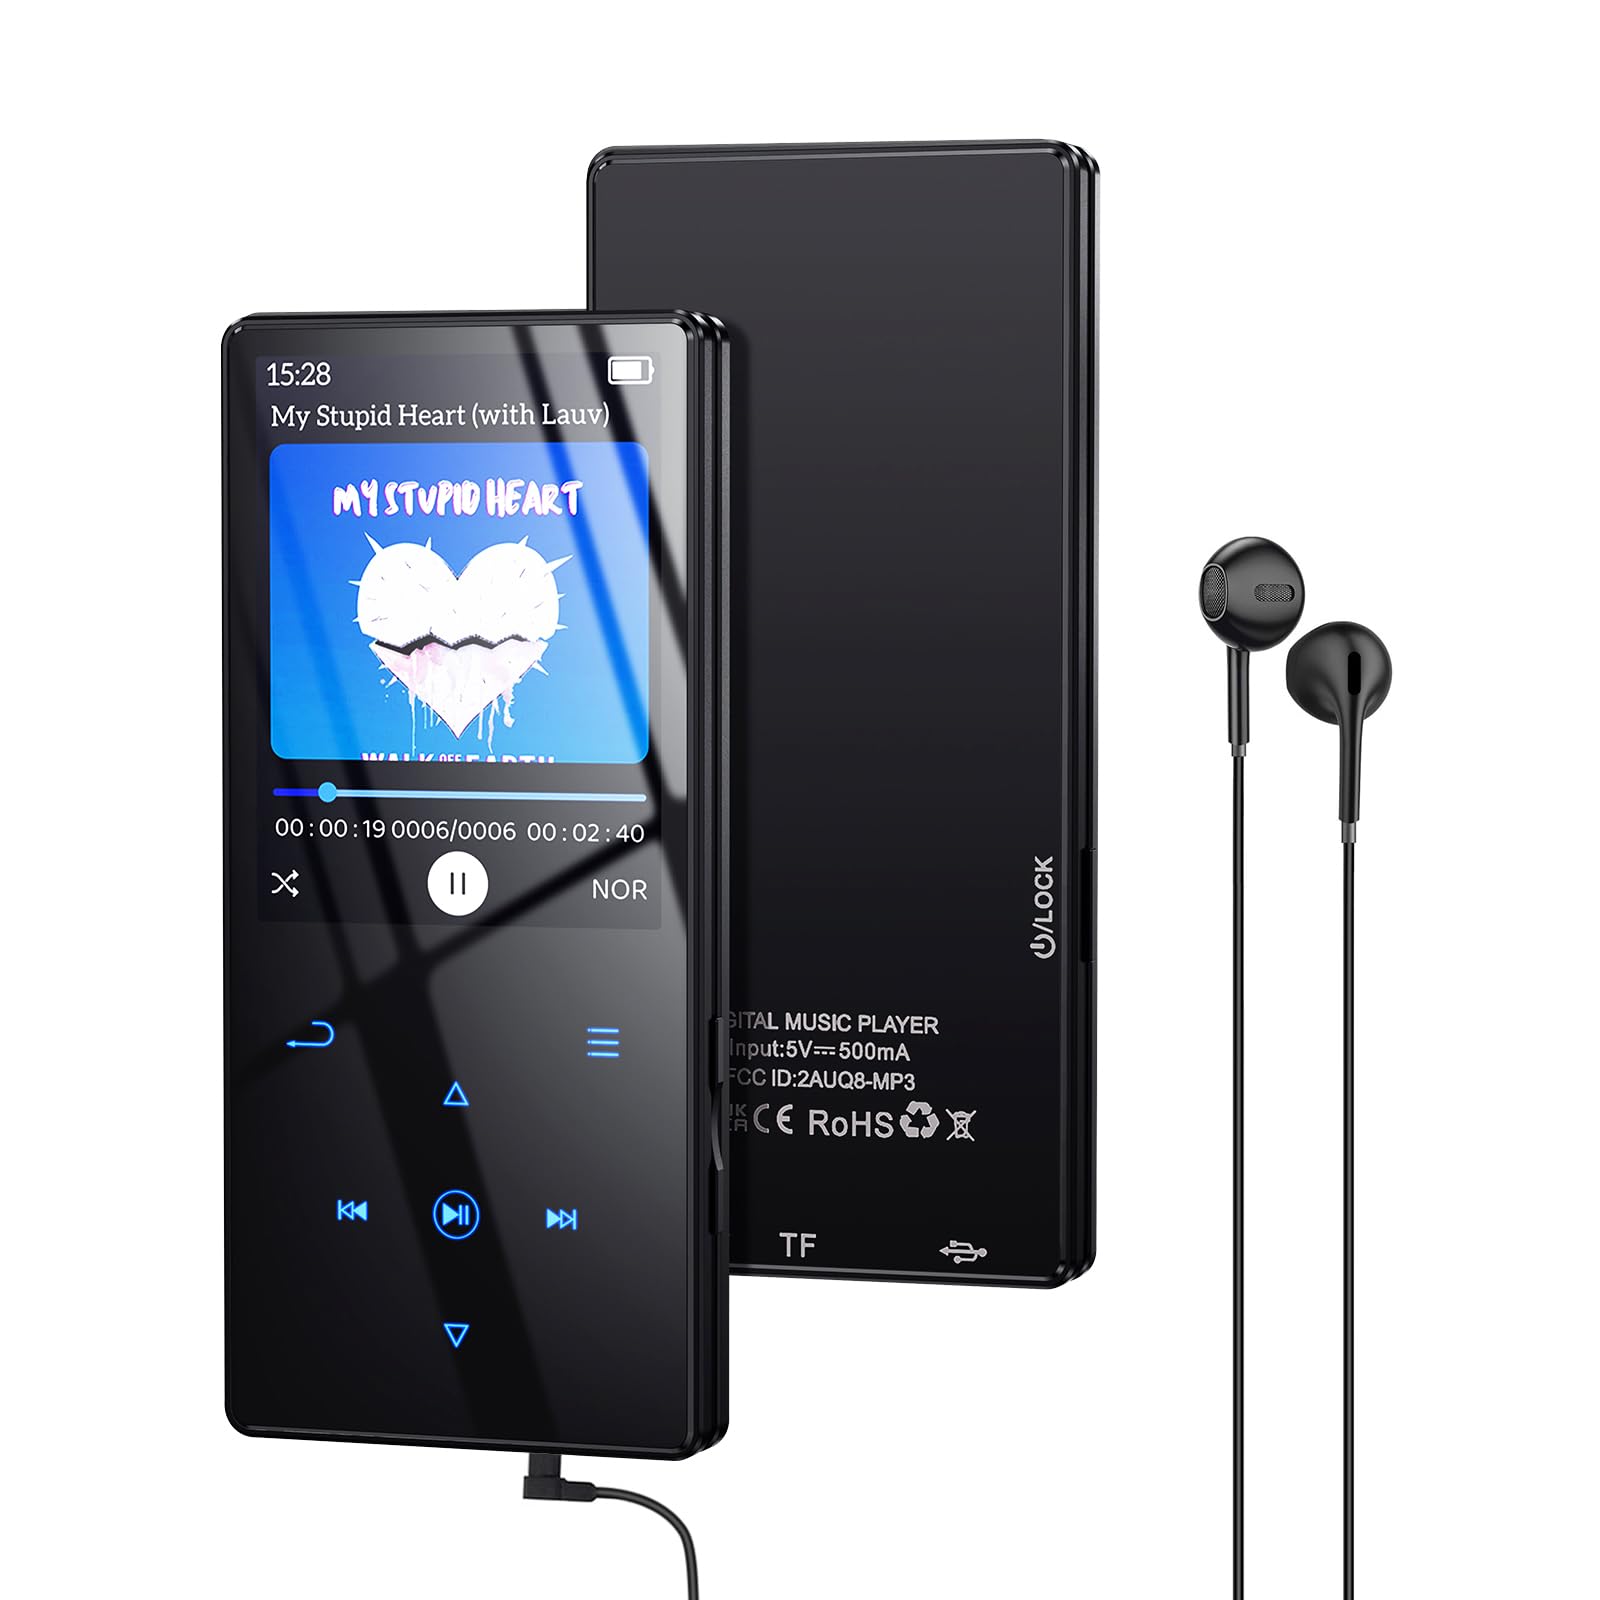 Yottix 64GB MP3 Player with Boosted Bluetooth 5.0, Music Player Features HD Speaker, 2.4" Screen, Touch Buttons, Expandable SD Card Slot, Supports FM Radio, Voice Recording, E-Book, and More